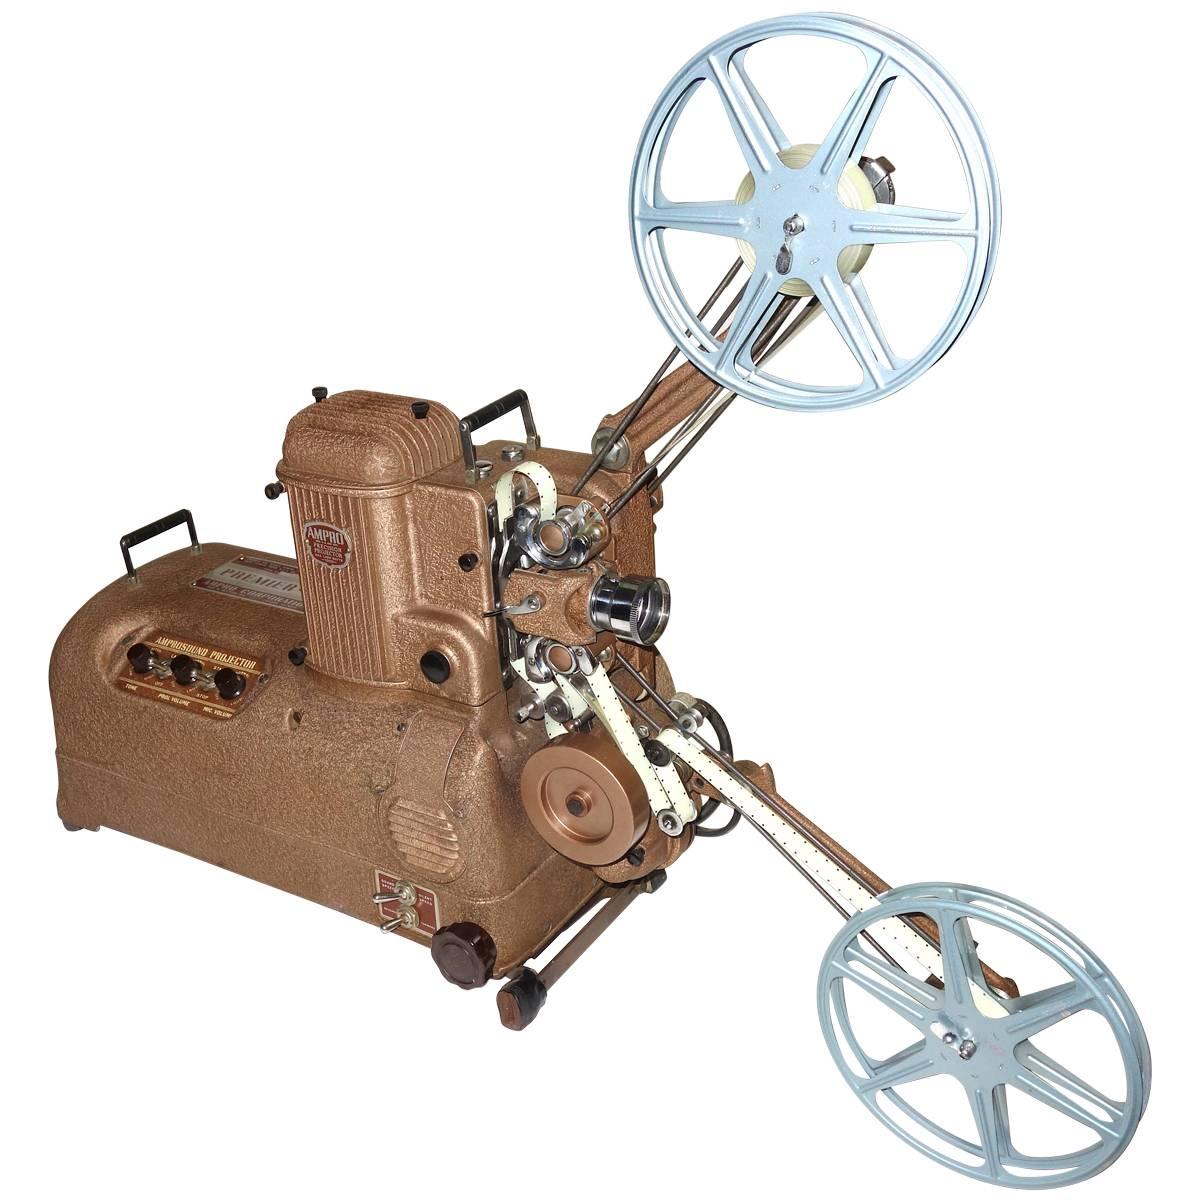 Cinema Projector, Iconic Sculpture Display Movie Film Artifact, circa 1940s For Sale